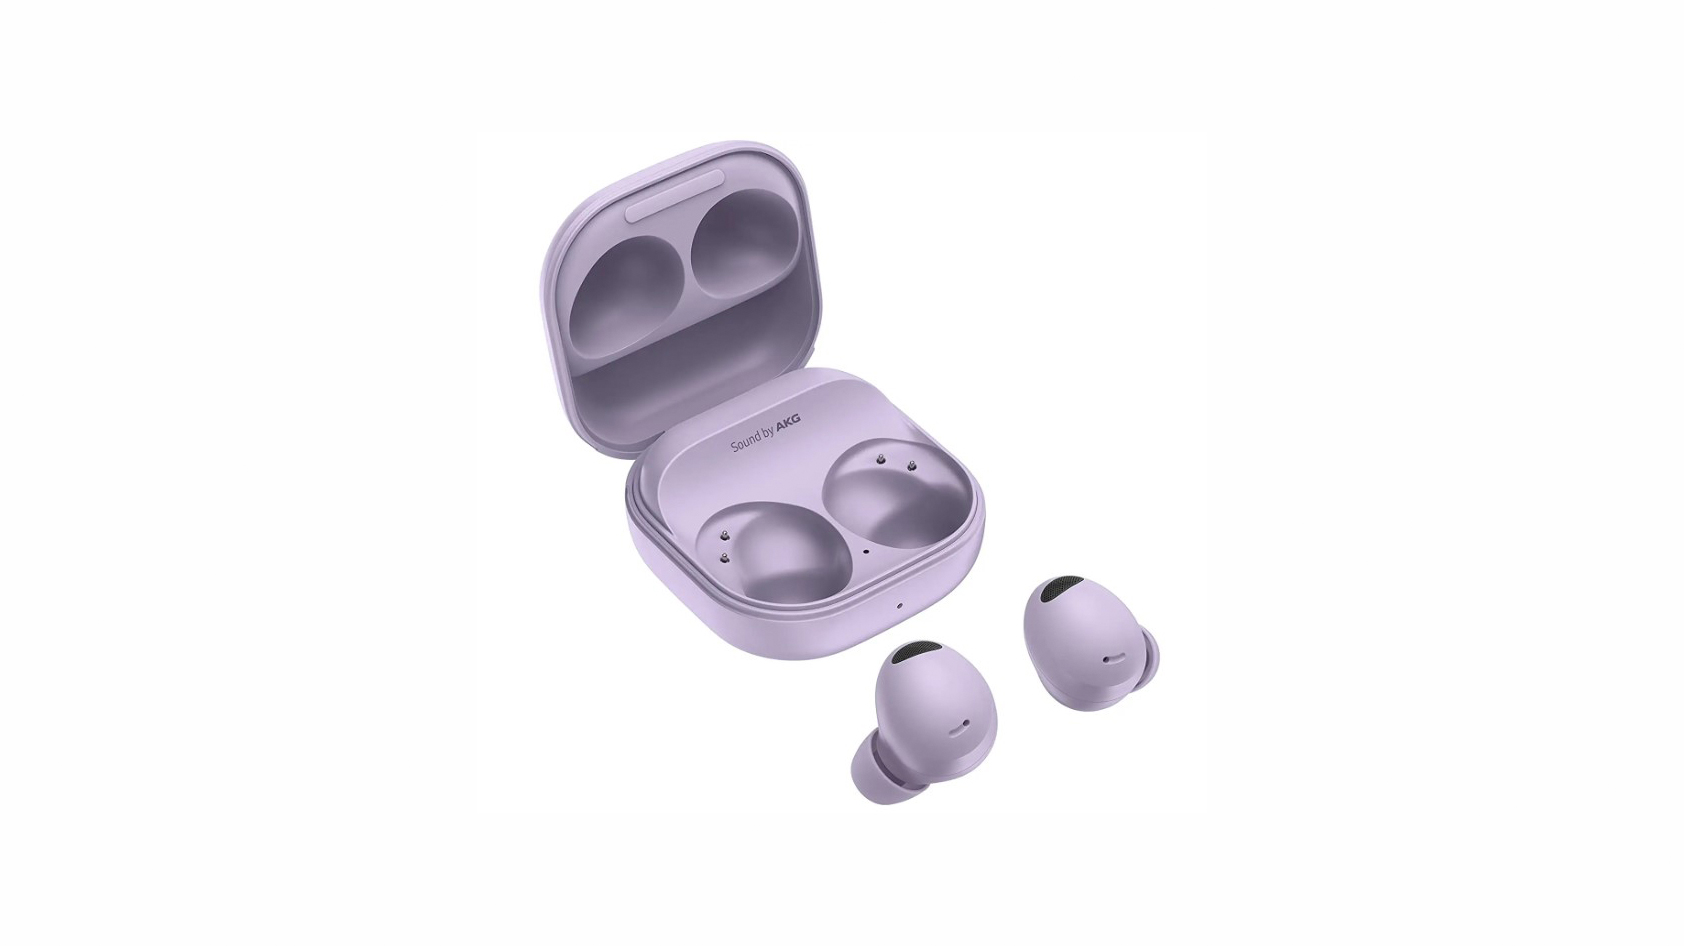 On a white background is the Samsung Galaxy Buds 2 Pro in Bora Purple with the buds sitting outside the case.